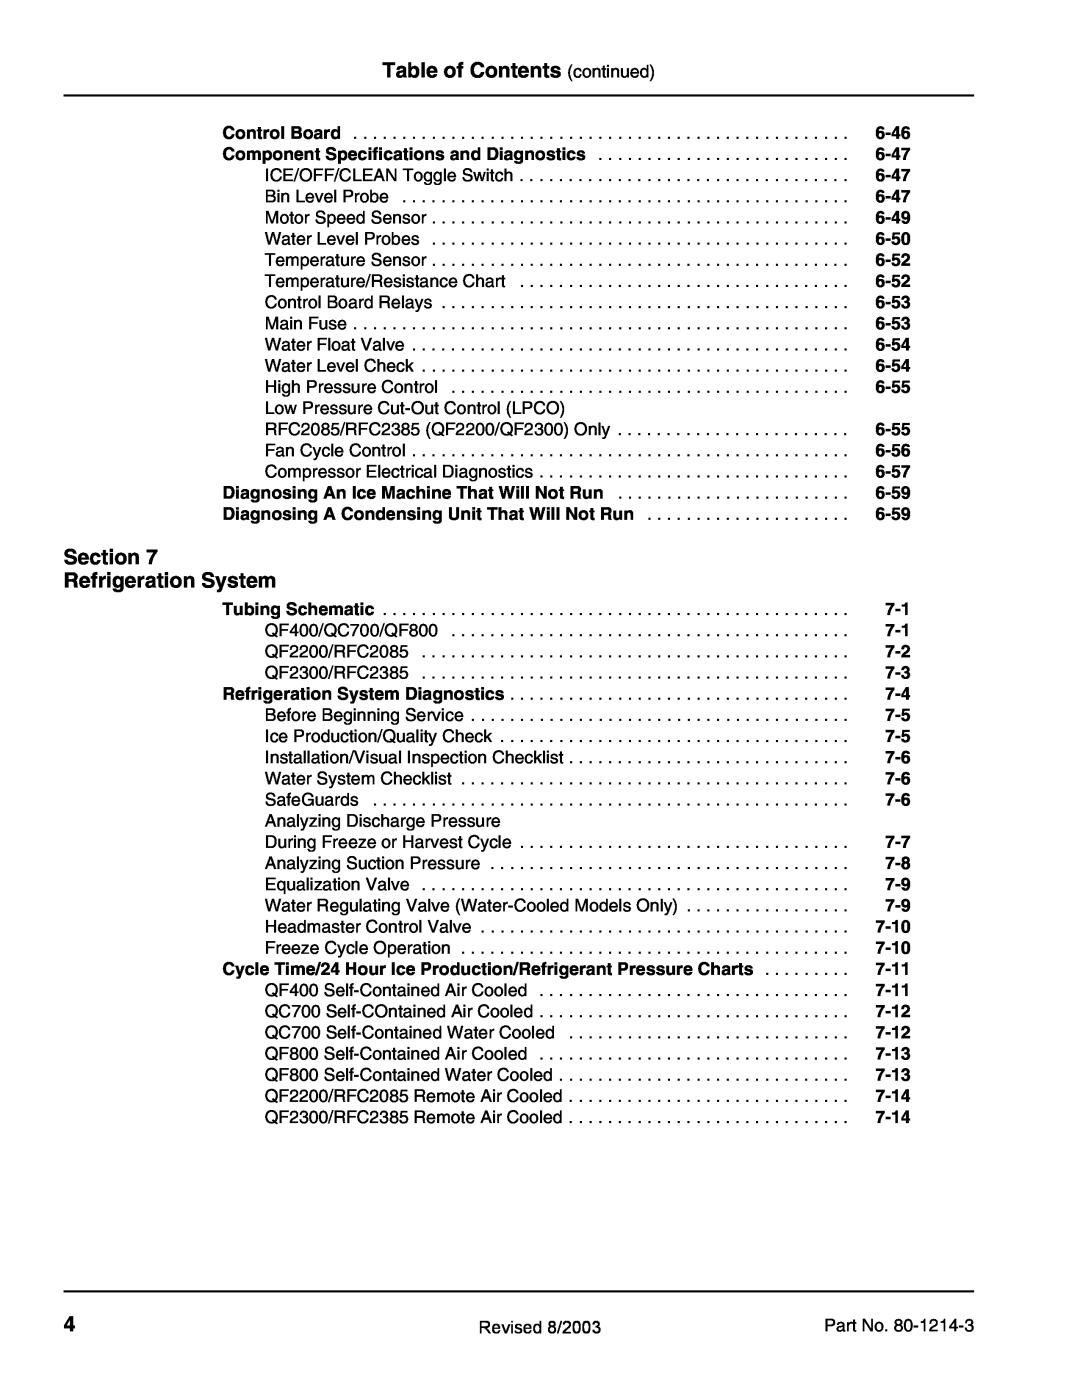 Manitowoc Ice QF0800 Table of Contents continued, Section Refrigeration System, 6-46, 6-47, ICE/OFF/CLEAN Toggle Switch 